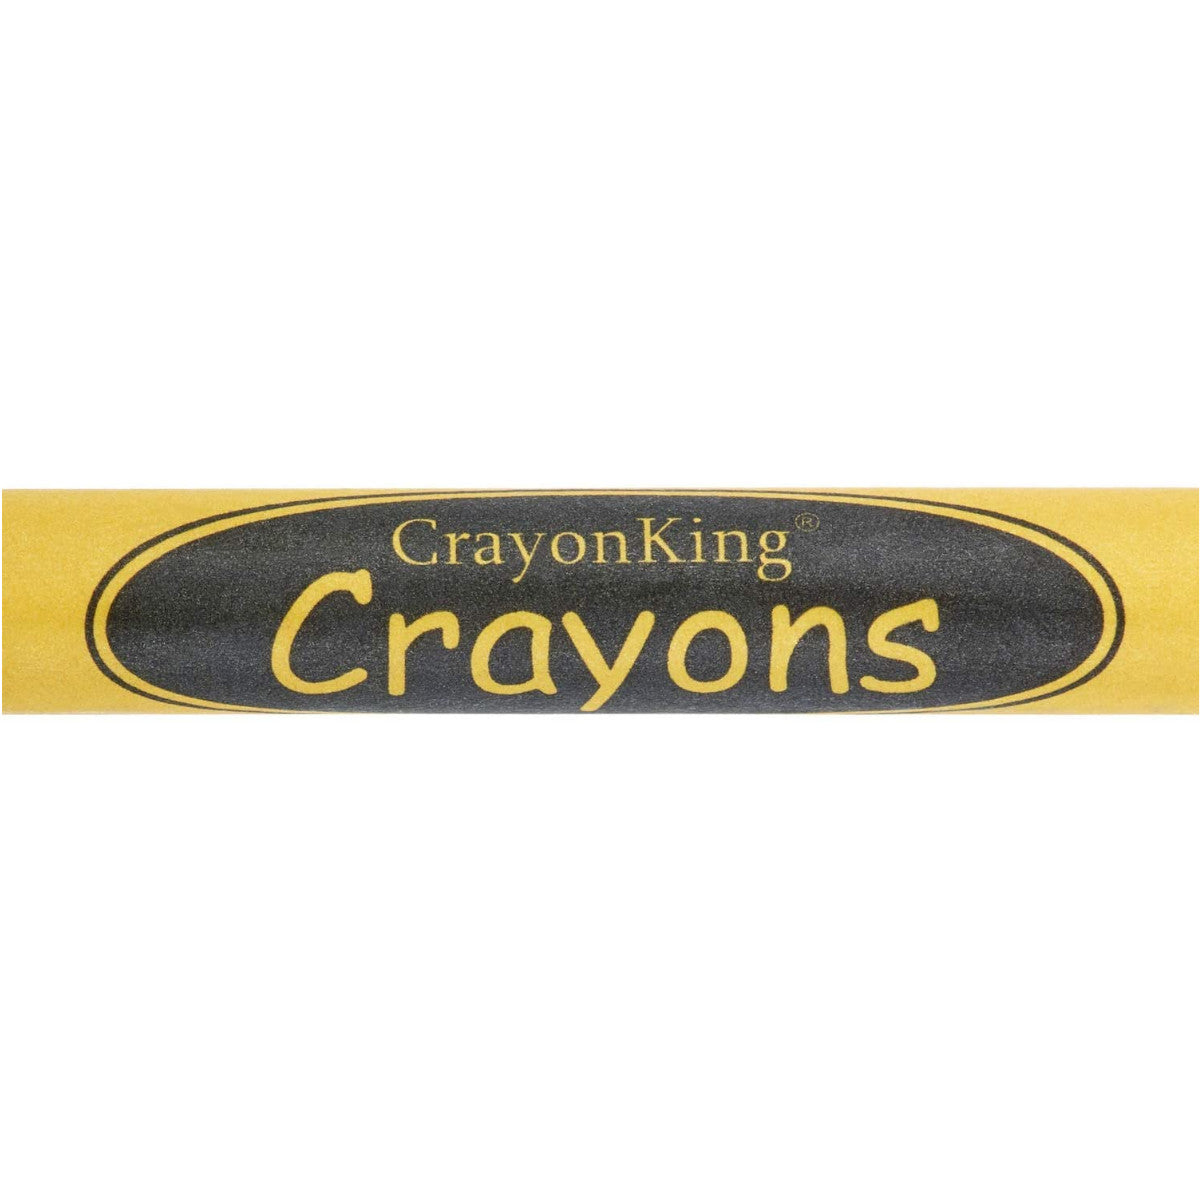 CrayonKing 50 4-Packs of Crayons in A Box